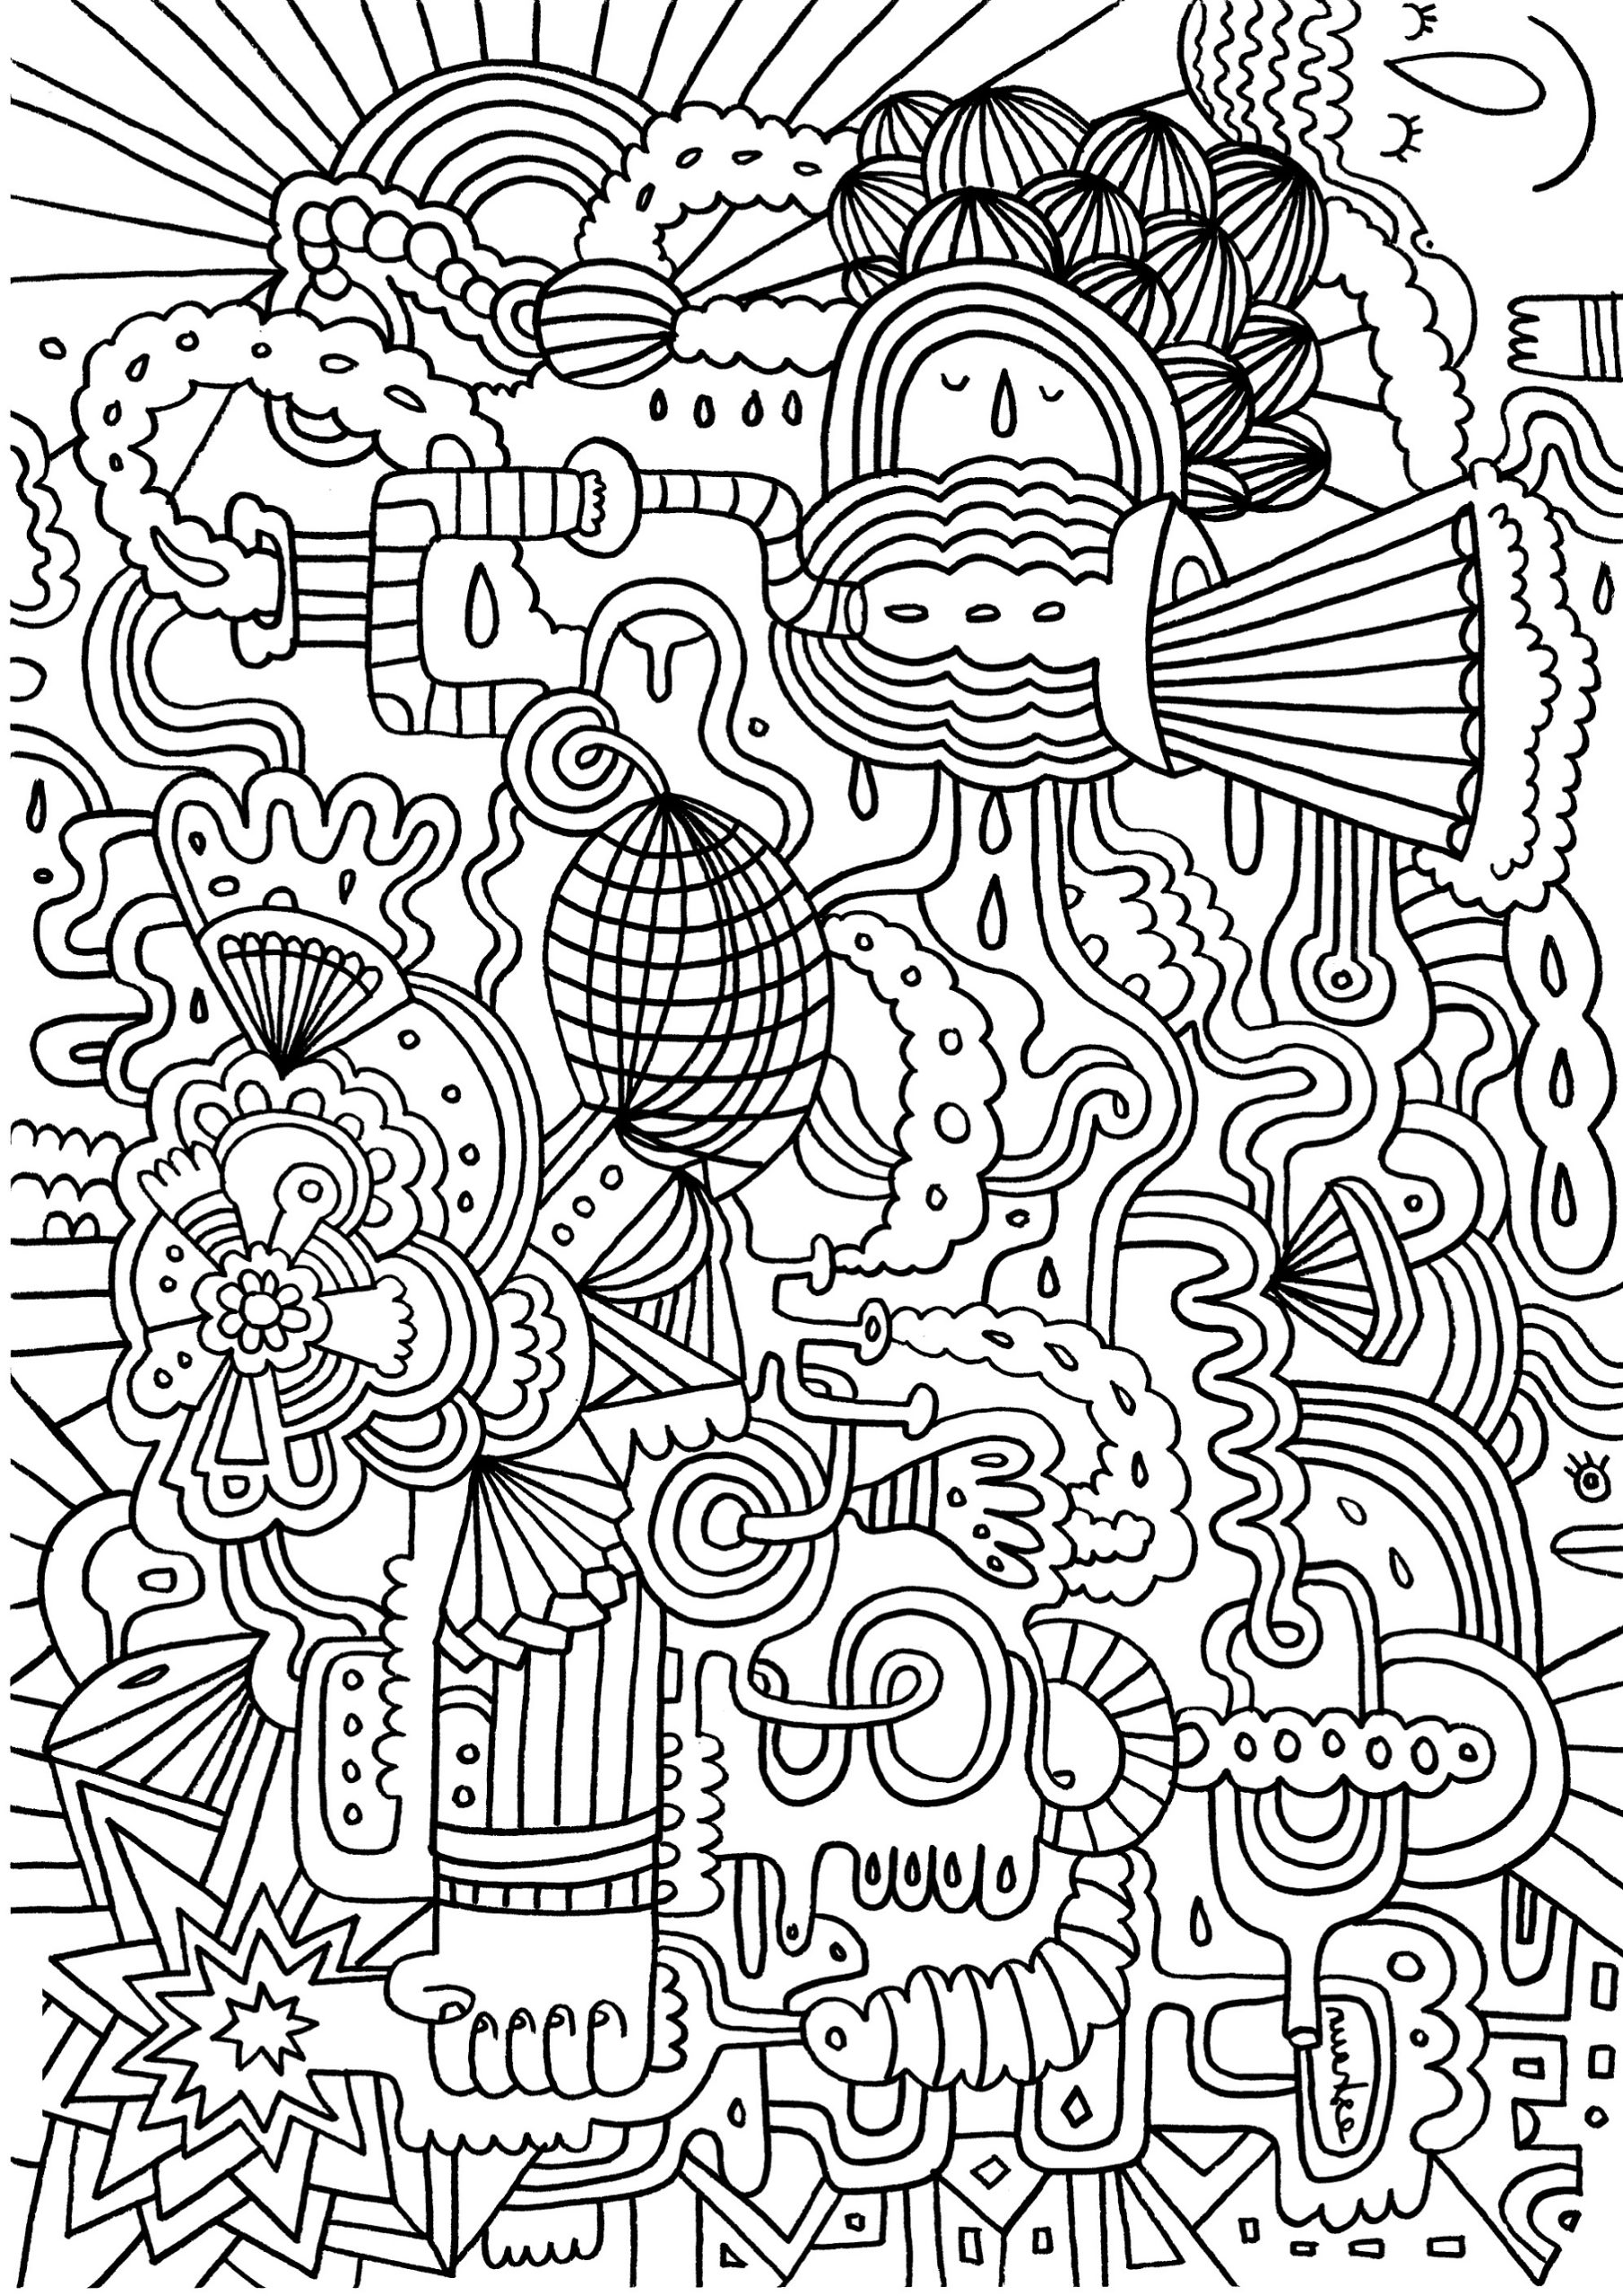 Coloring Pages To Print For Adults Crayola